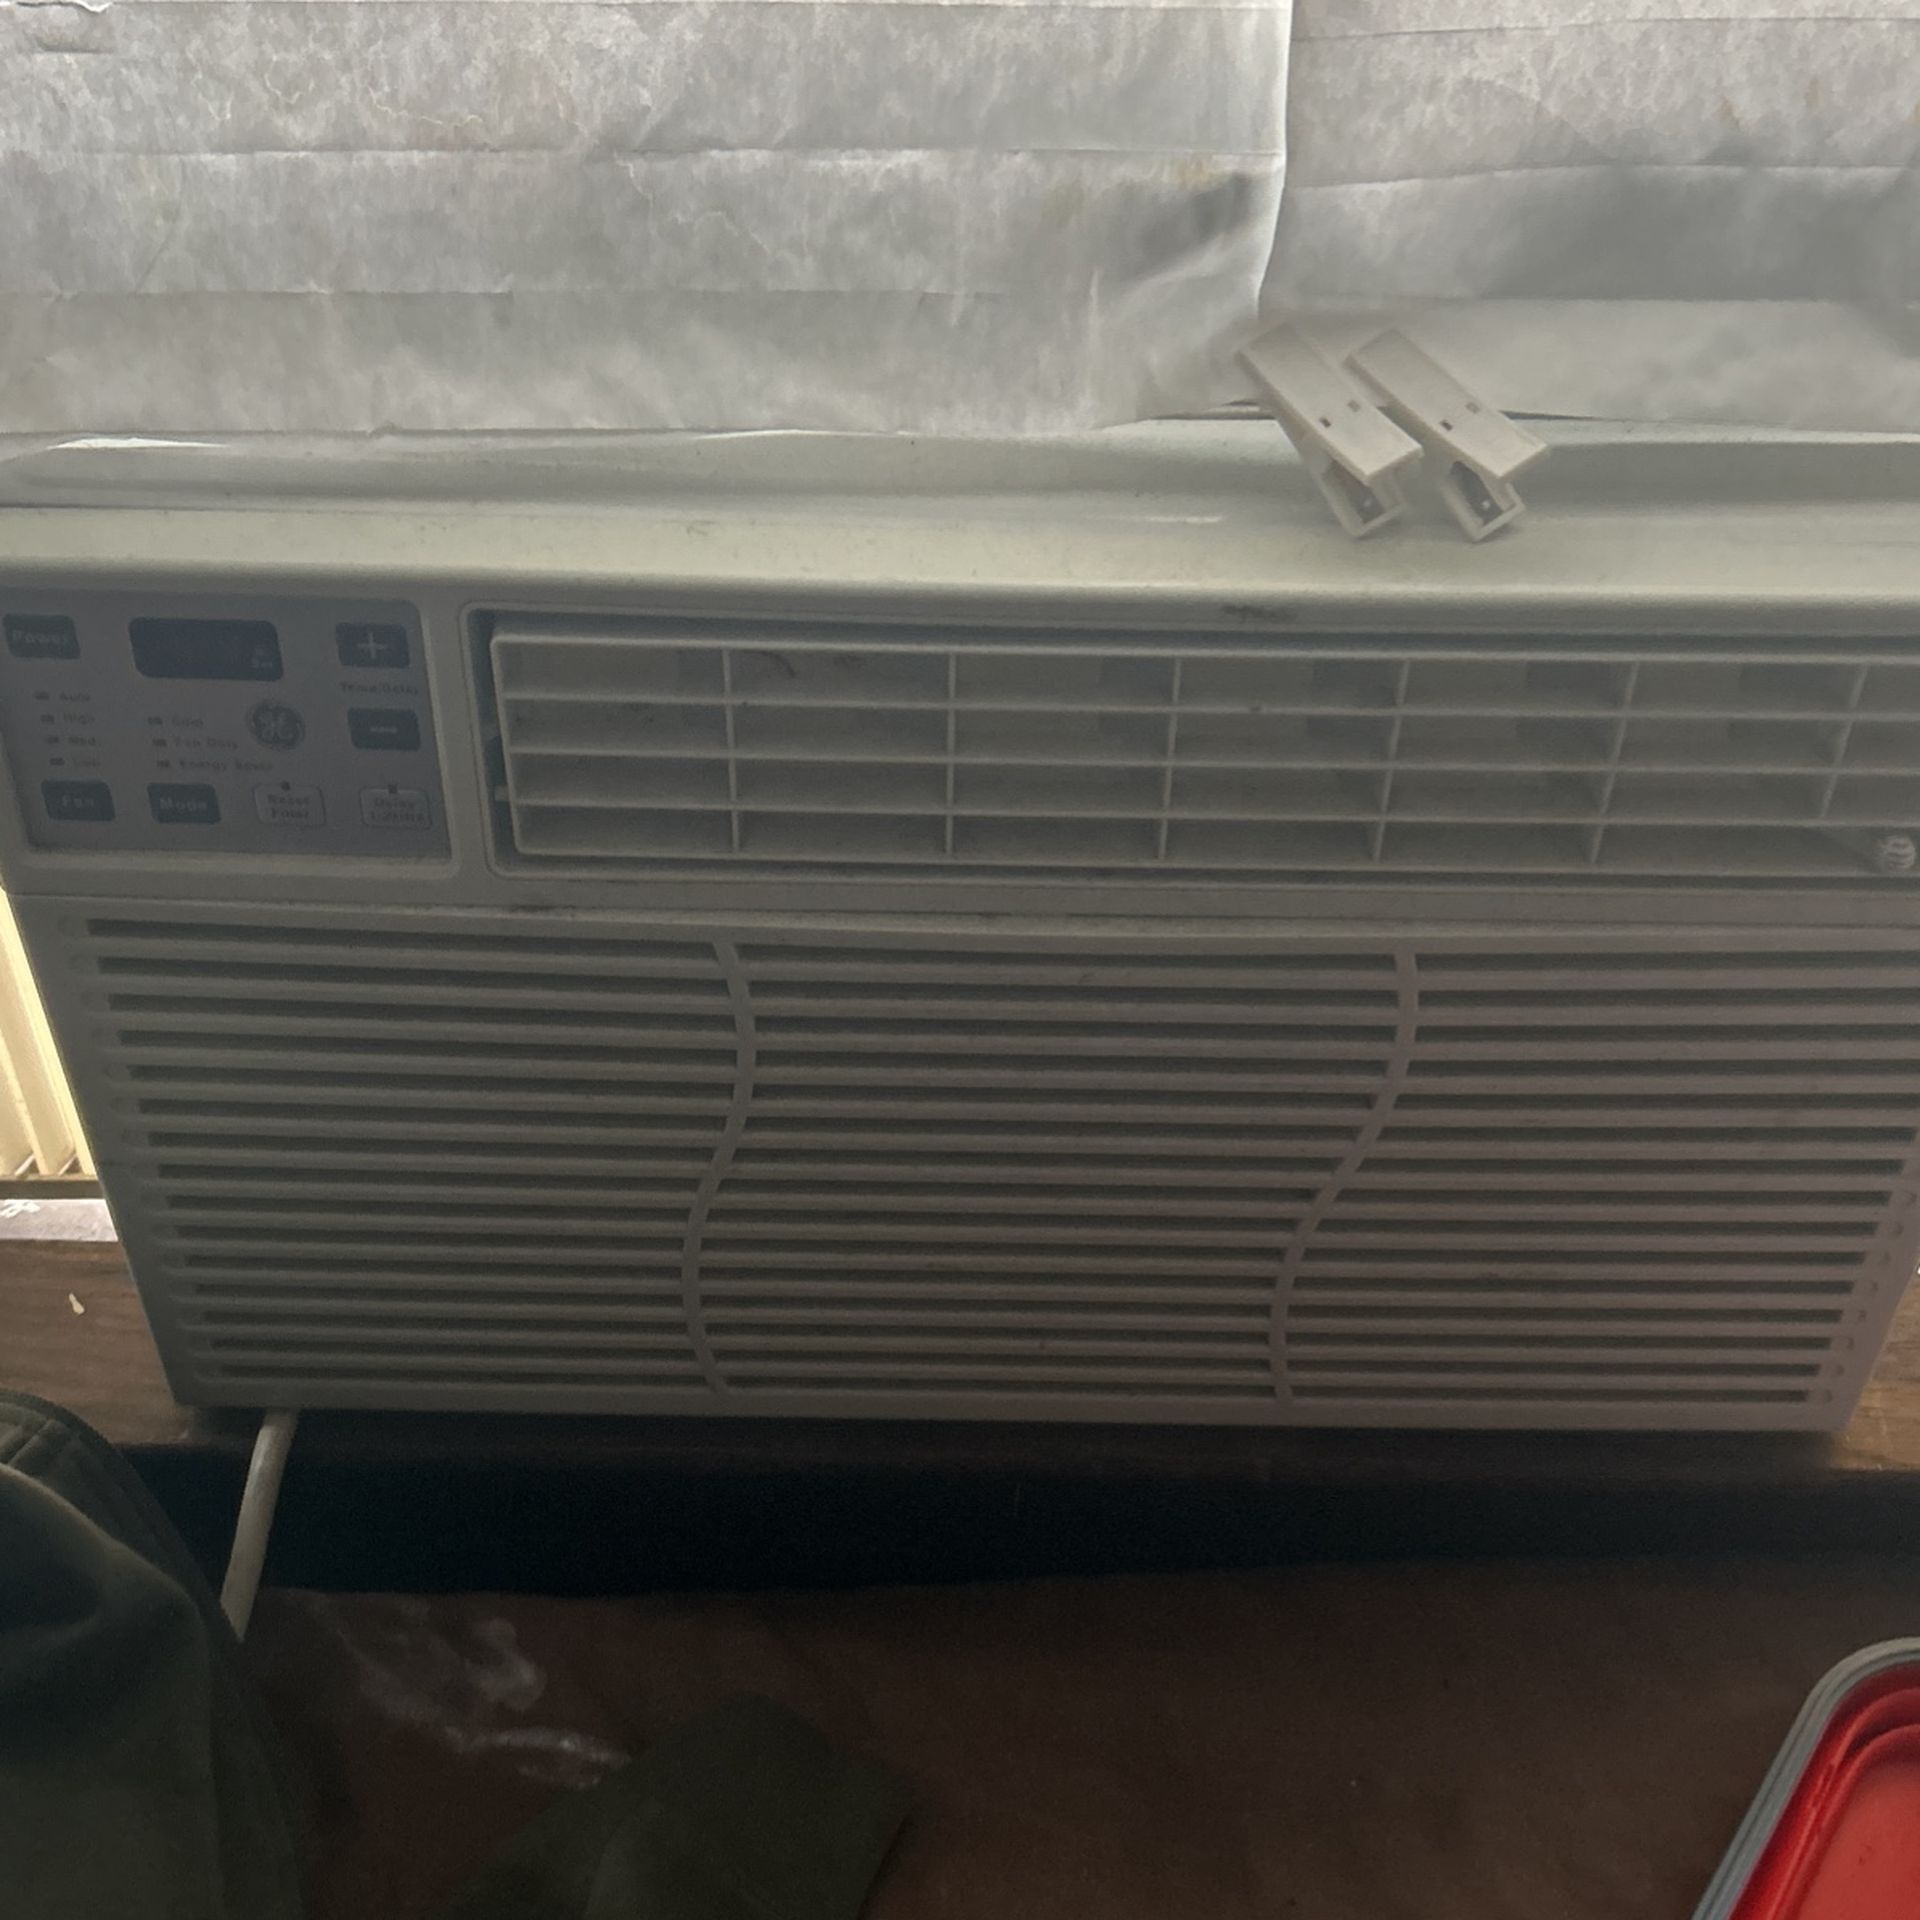 3 Window Ac Units $100 For All 3